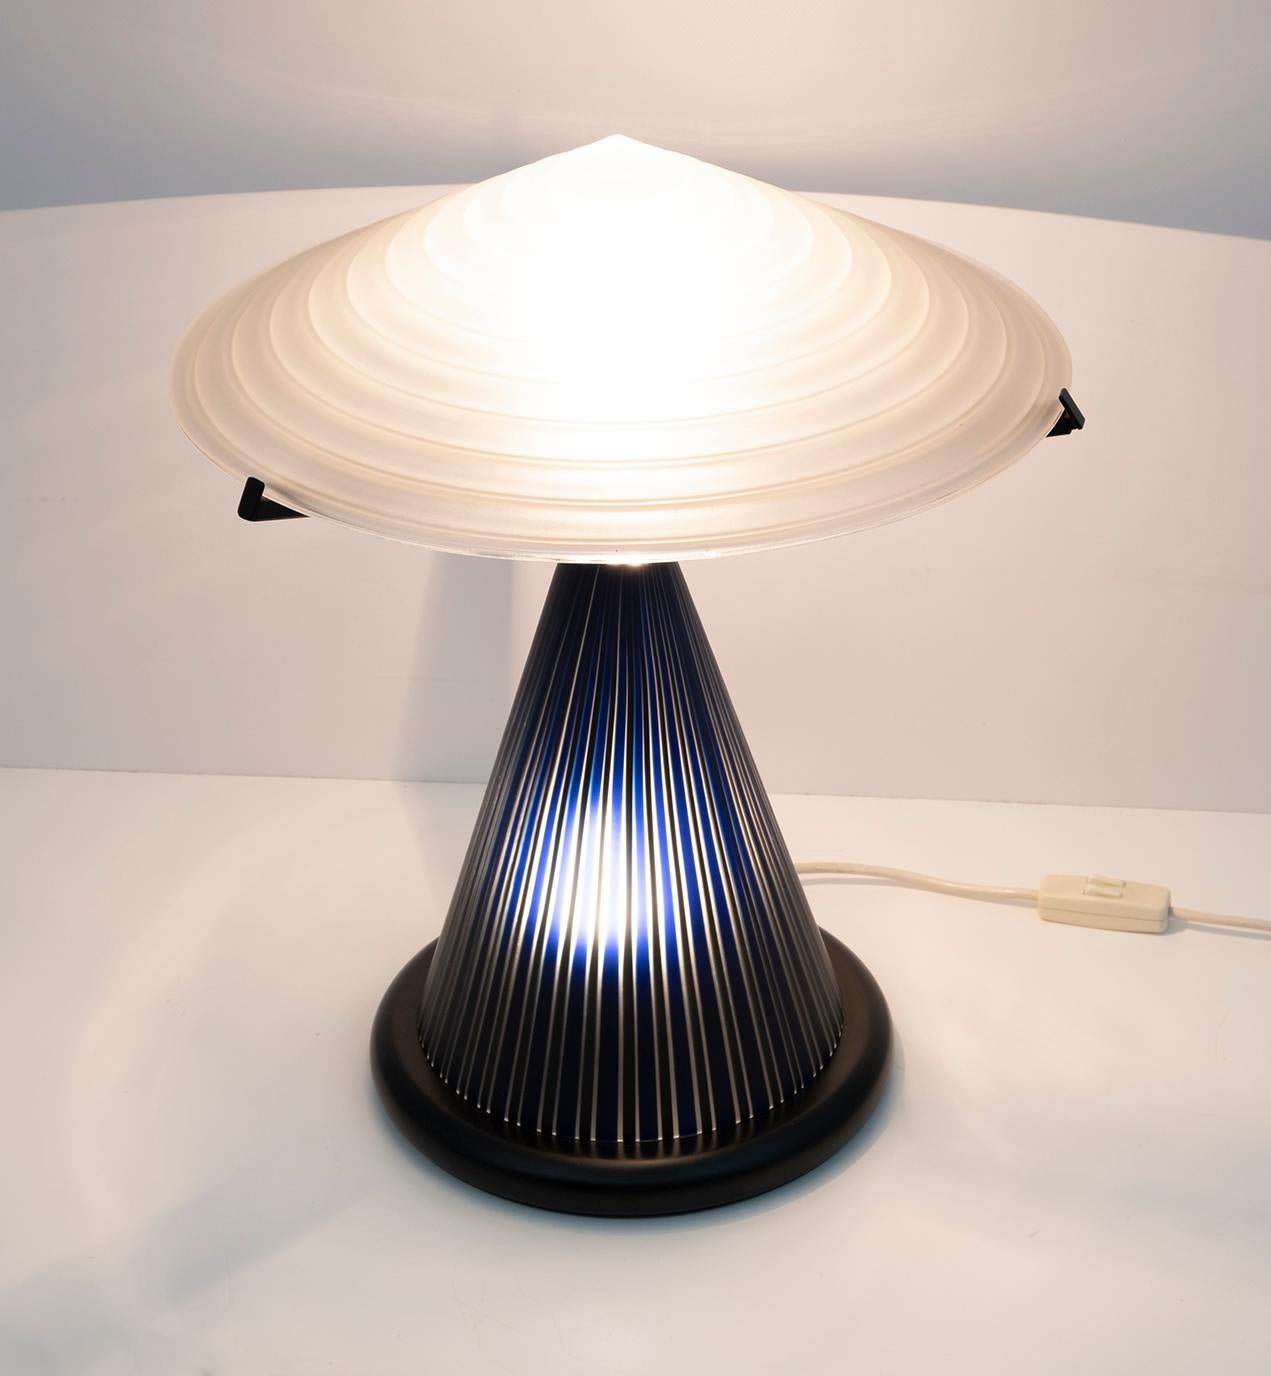 Pair of table lamps produced in Murano by the Masters of Murano, conical base in blown glass with colored rods, hat in white etched glass. The lamps have a double switch, as in the photo it is possible to illuminate the lower part, with a softer